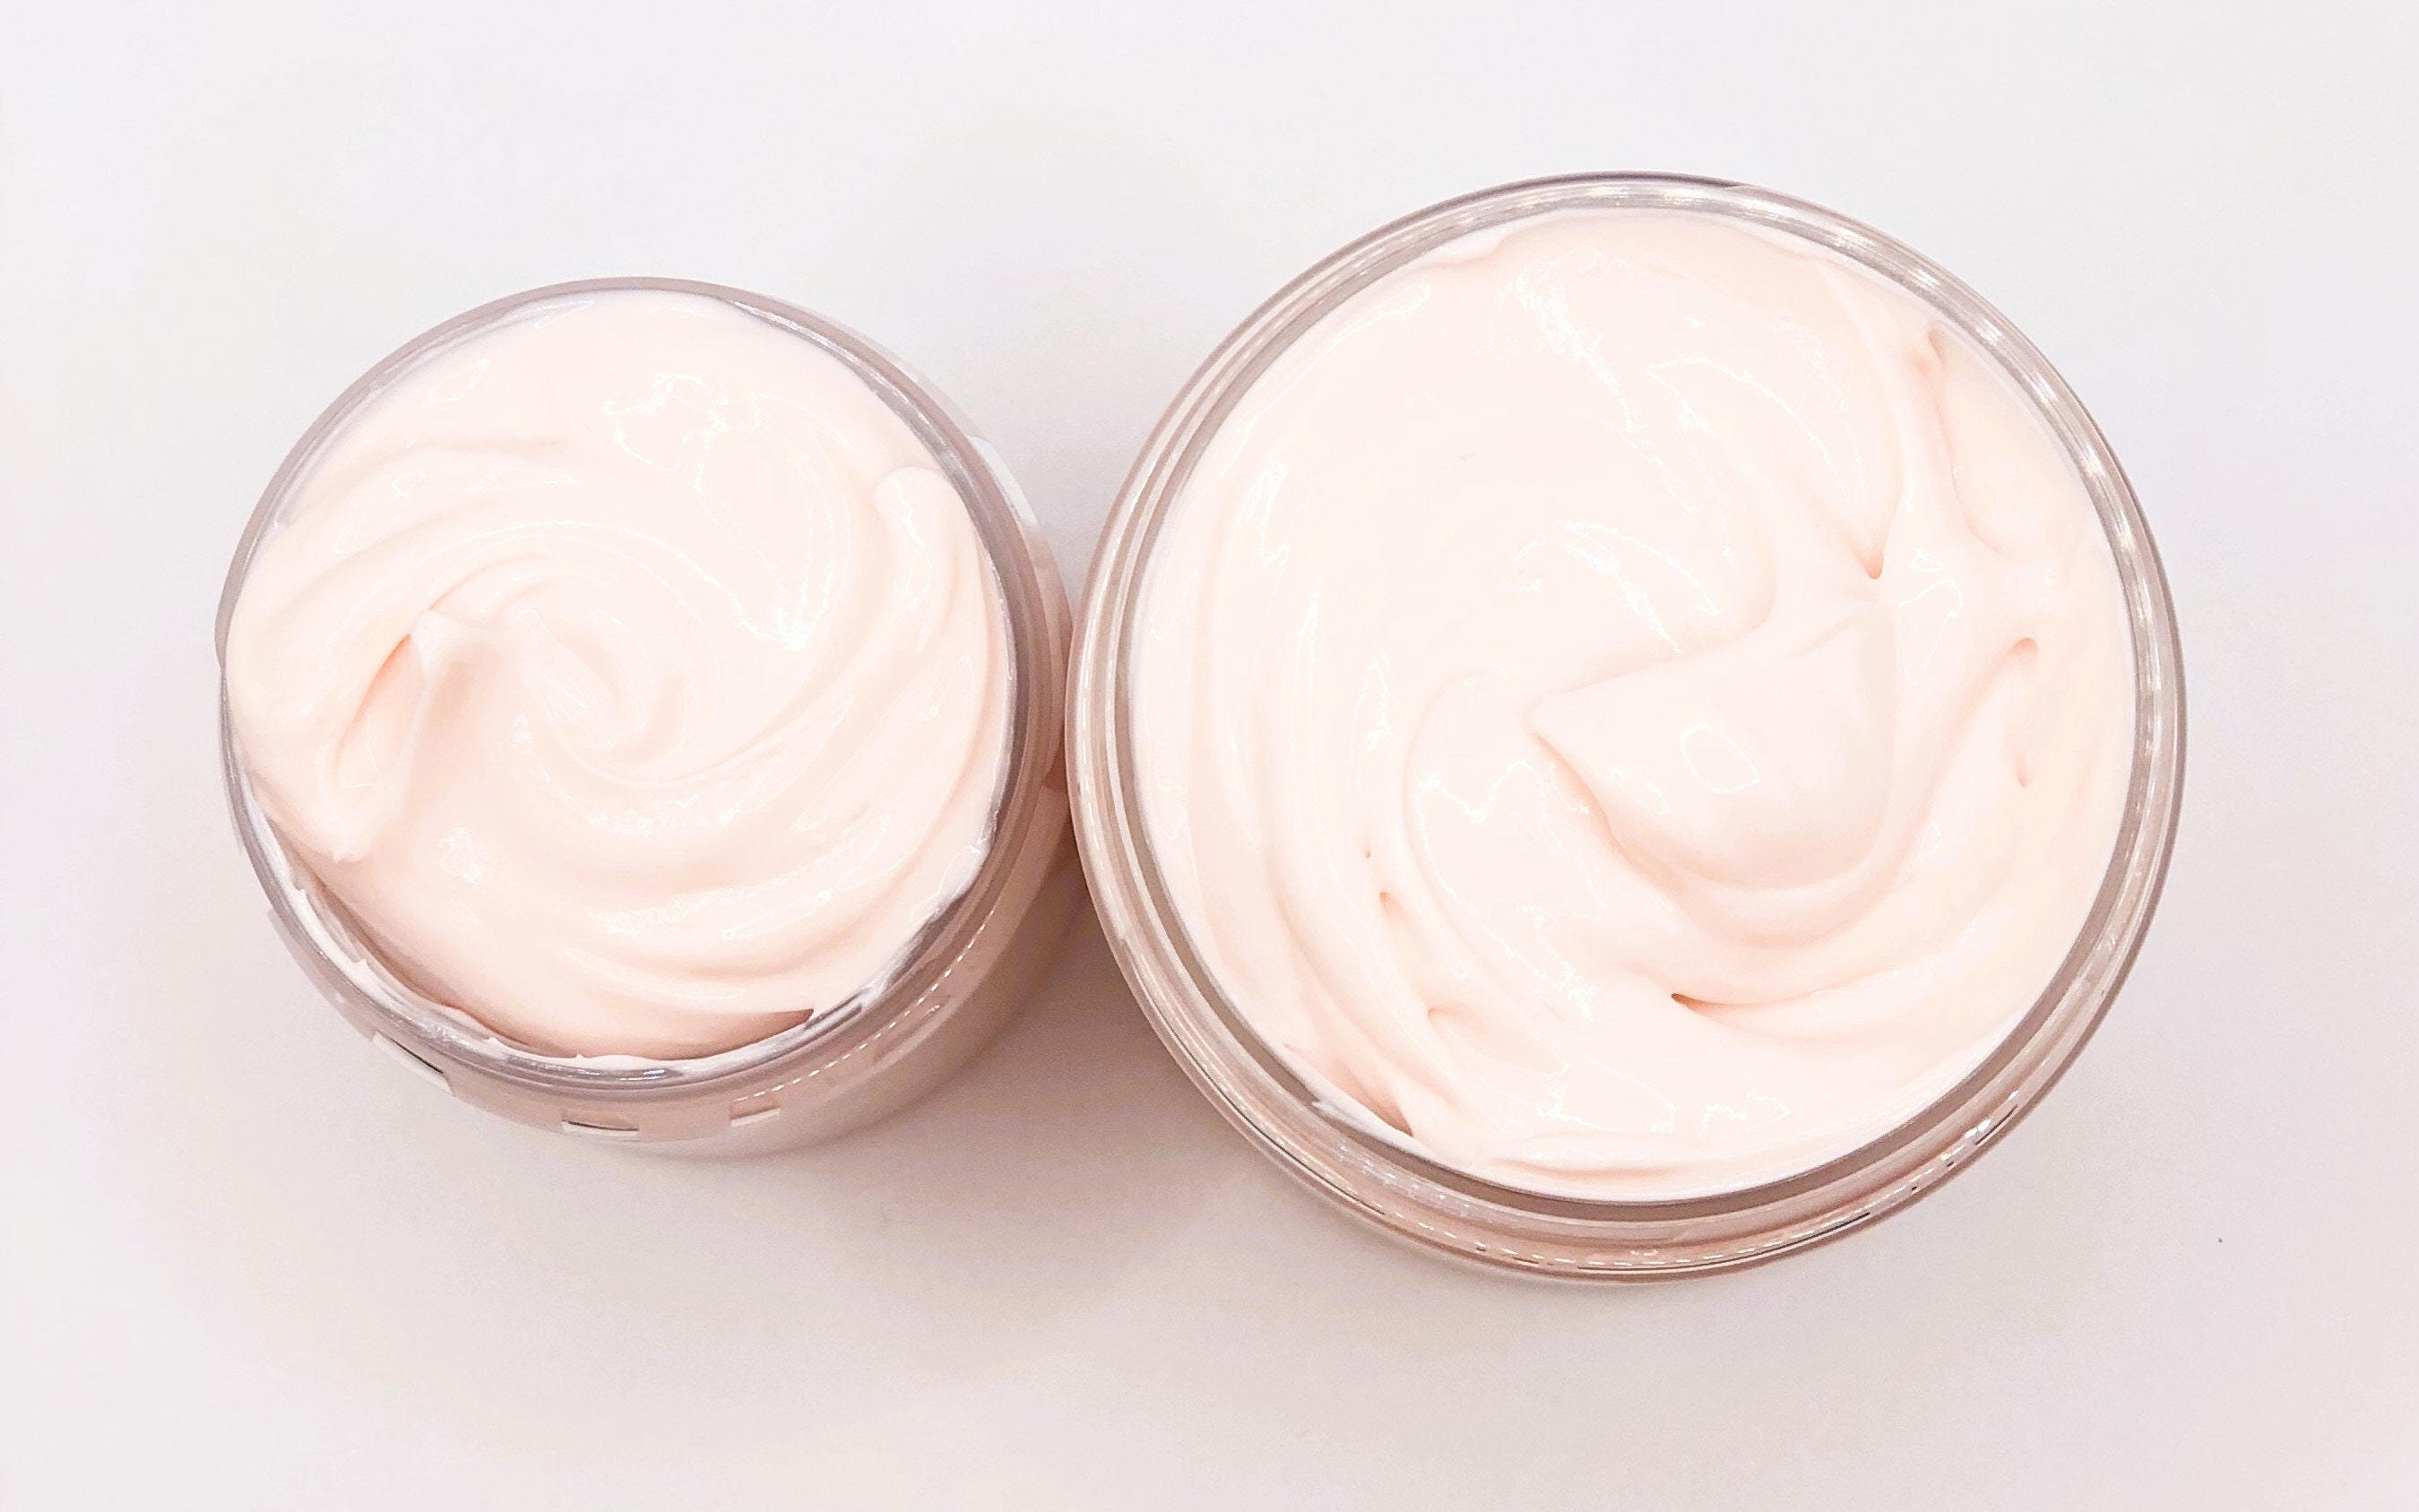 Cashmere glow emulsifying body butter for dry skin – Fatyncrafts